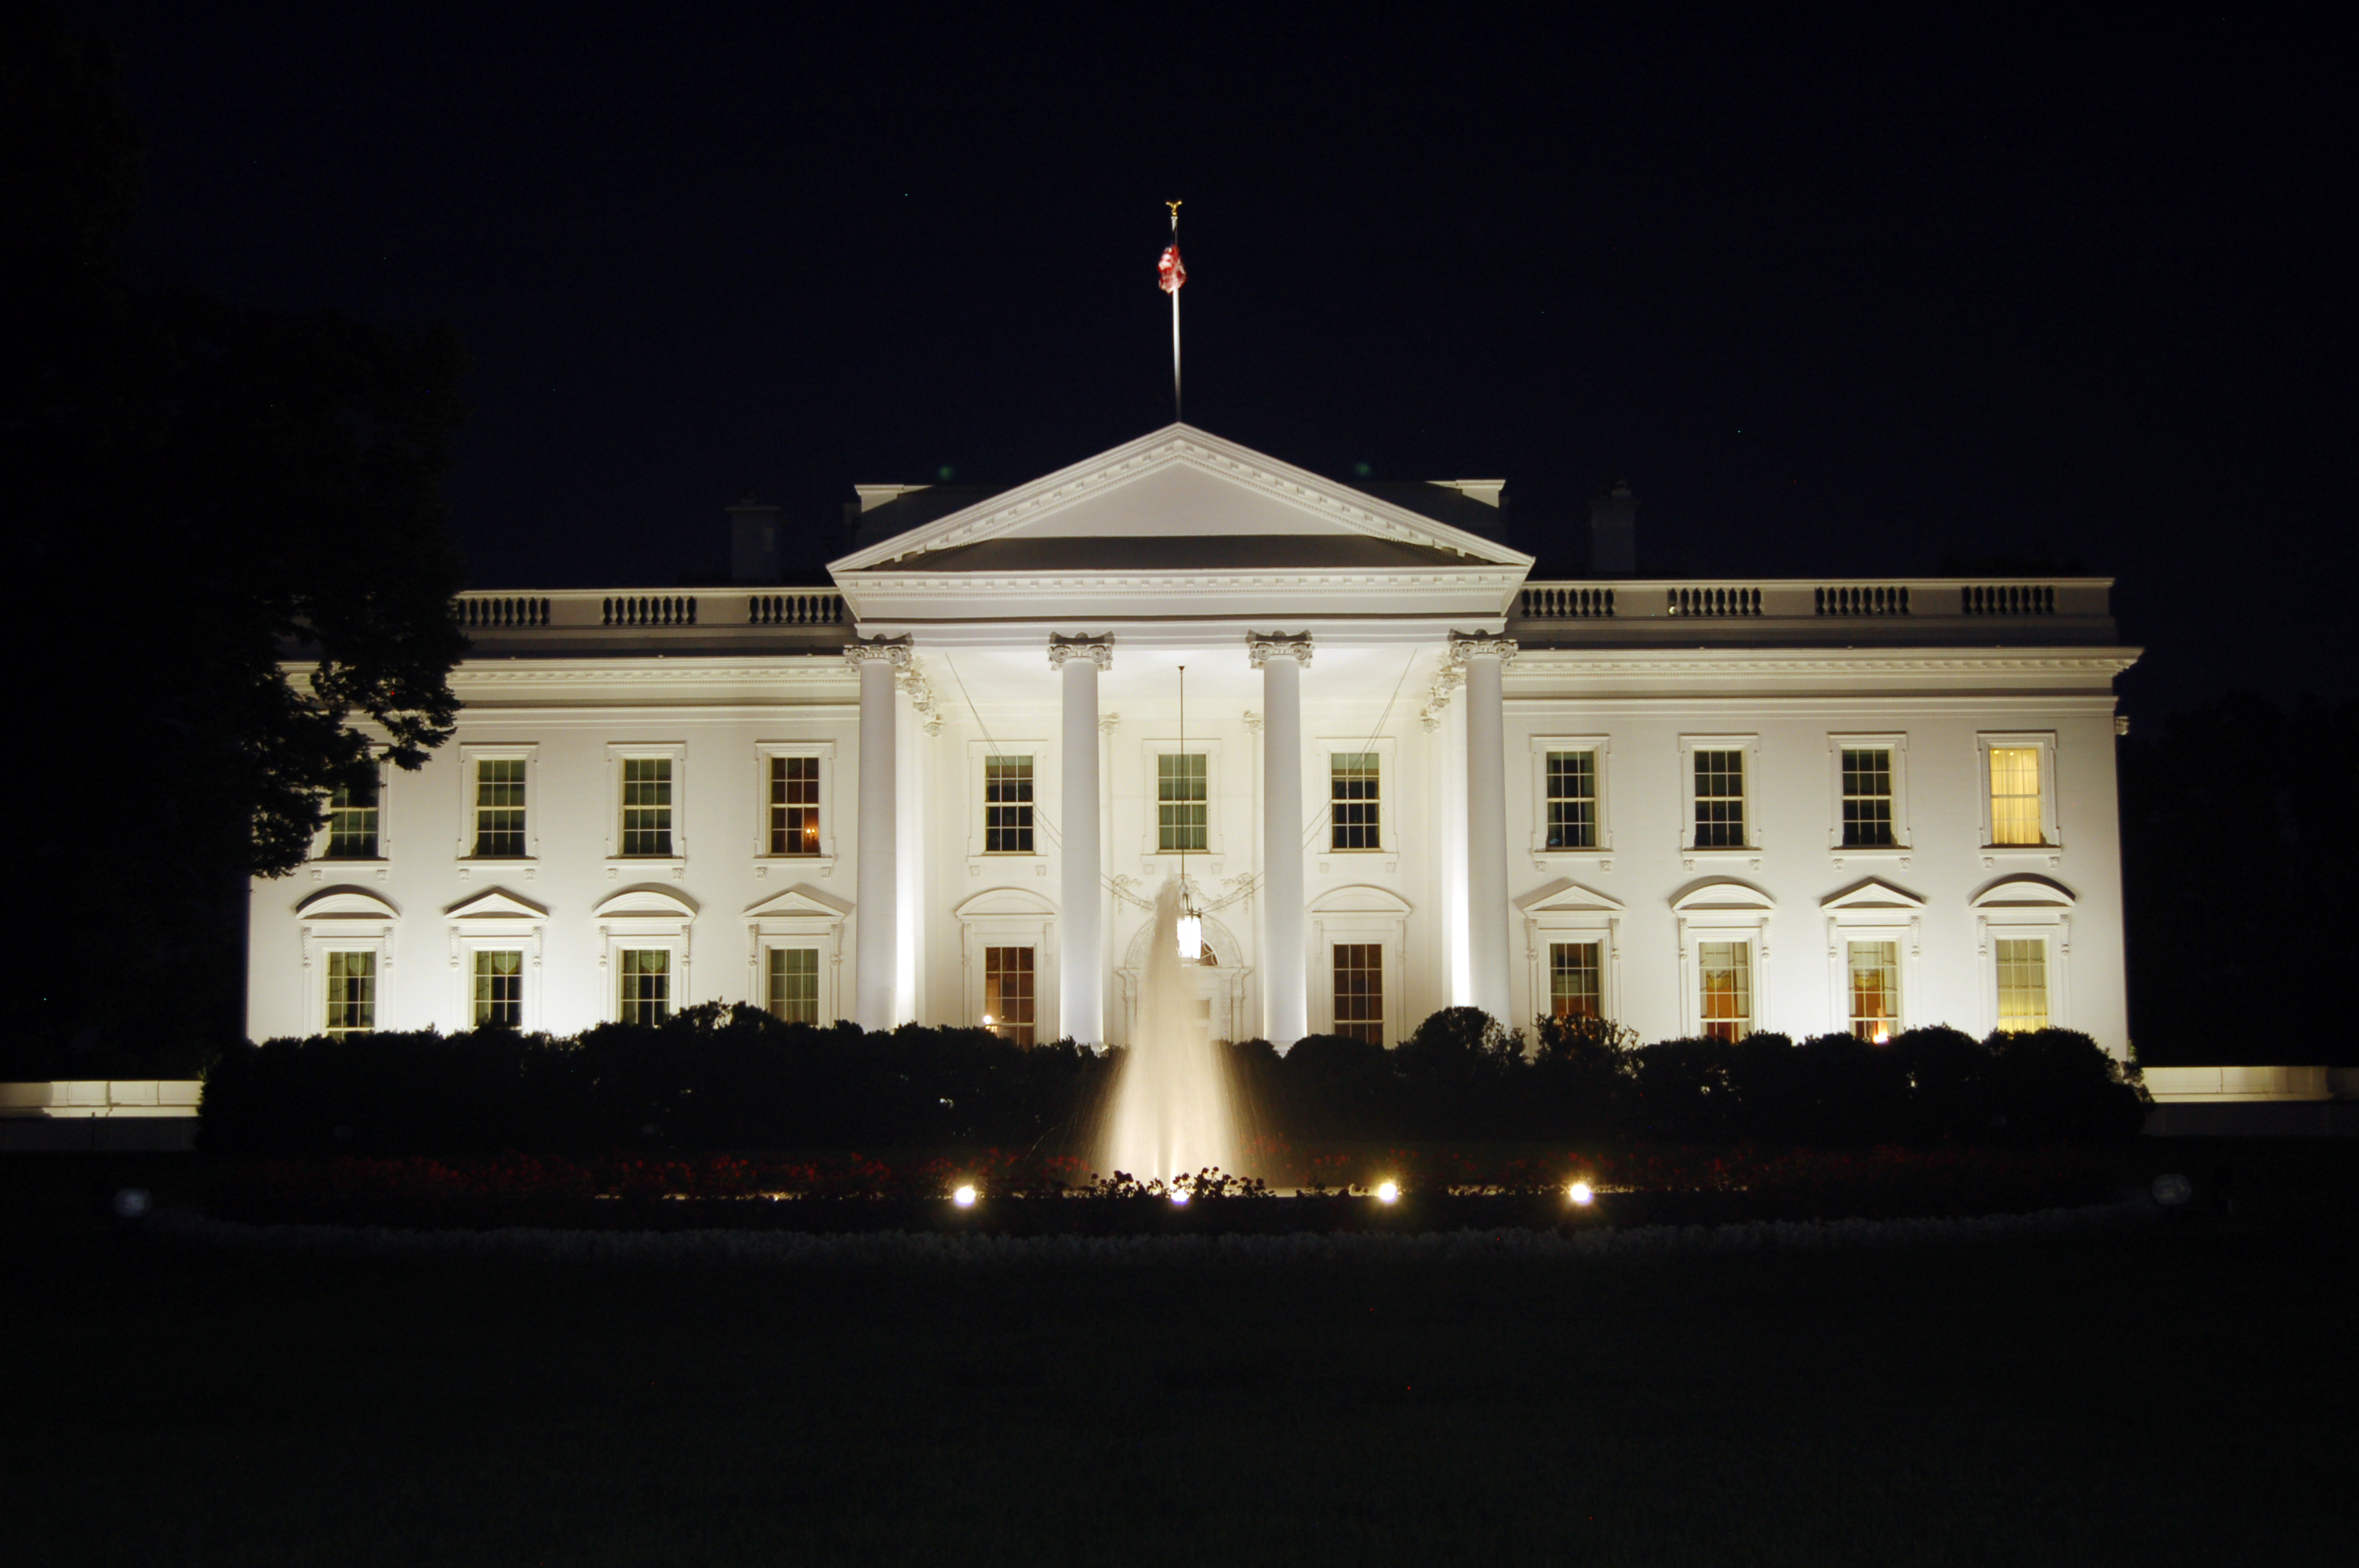 White House at Night photo by By Rob Young from United Kingdom